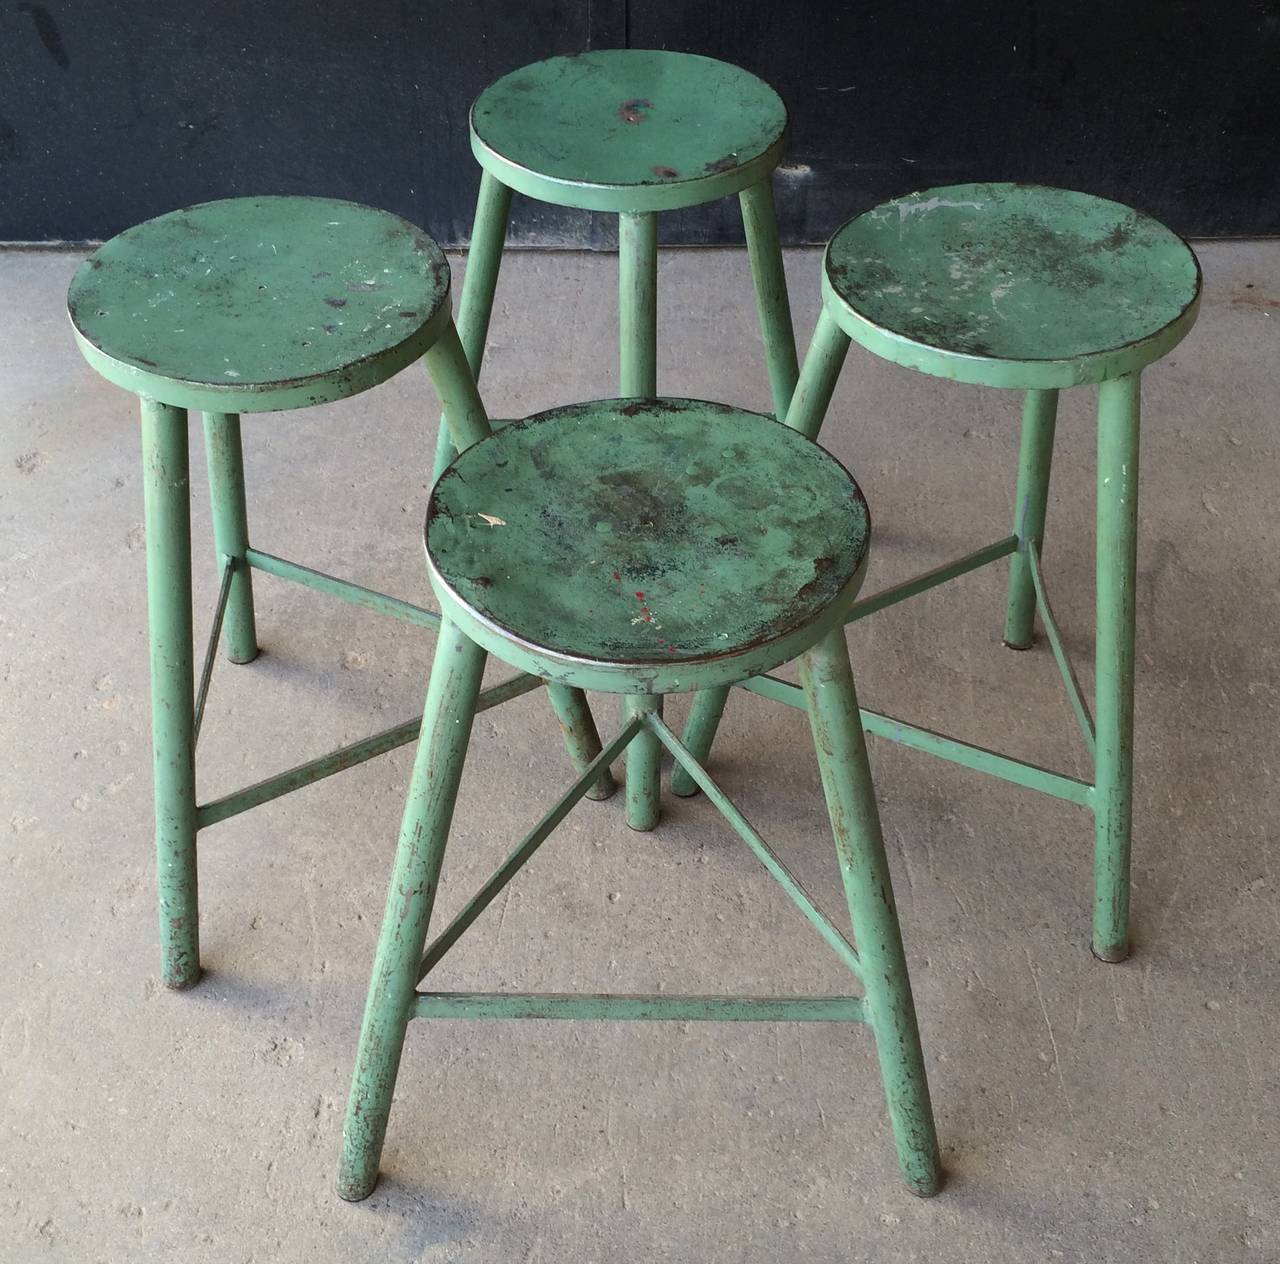 Vintage Industrial Metal Stools with Original Paint In Distressed Condition For Sale In Minneapolis, MN